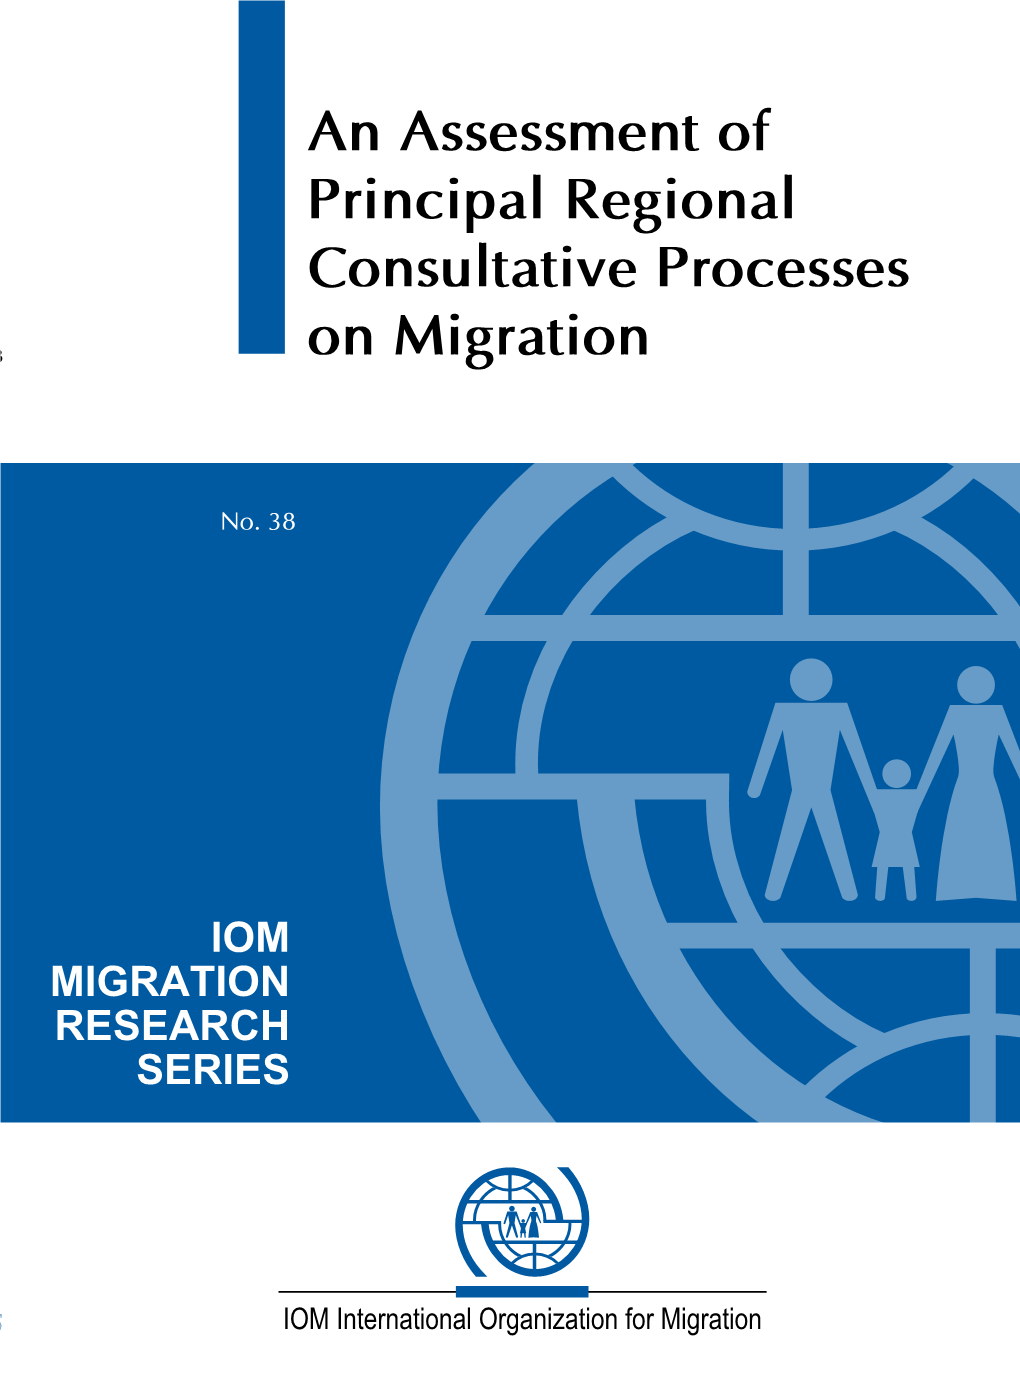 An Assessment of Principal Regional Consultative Processes on Migration